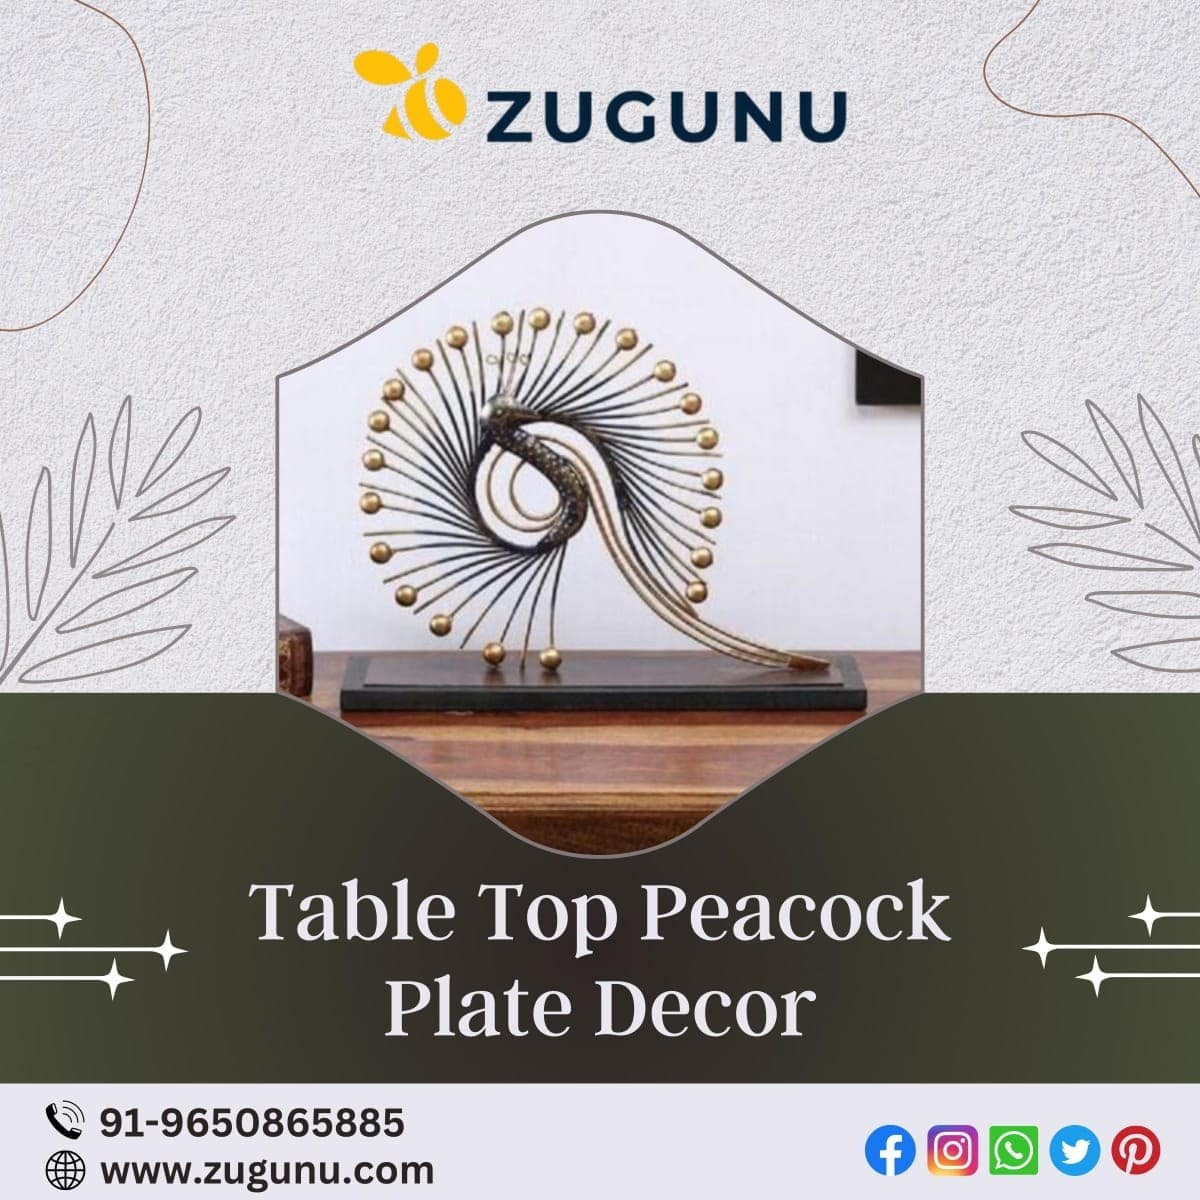 Table Top Peacock Plate Decor Transform Your Home